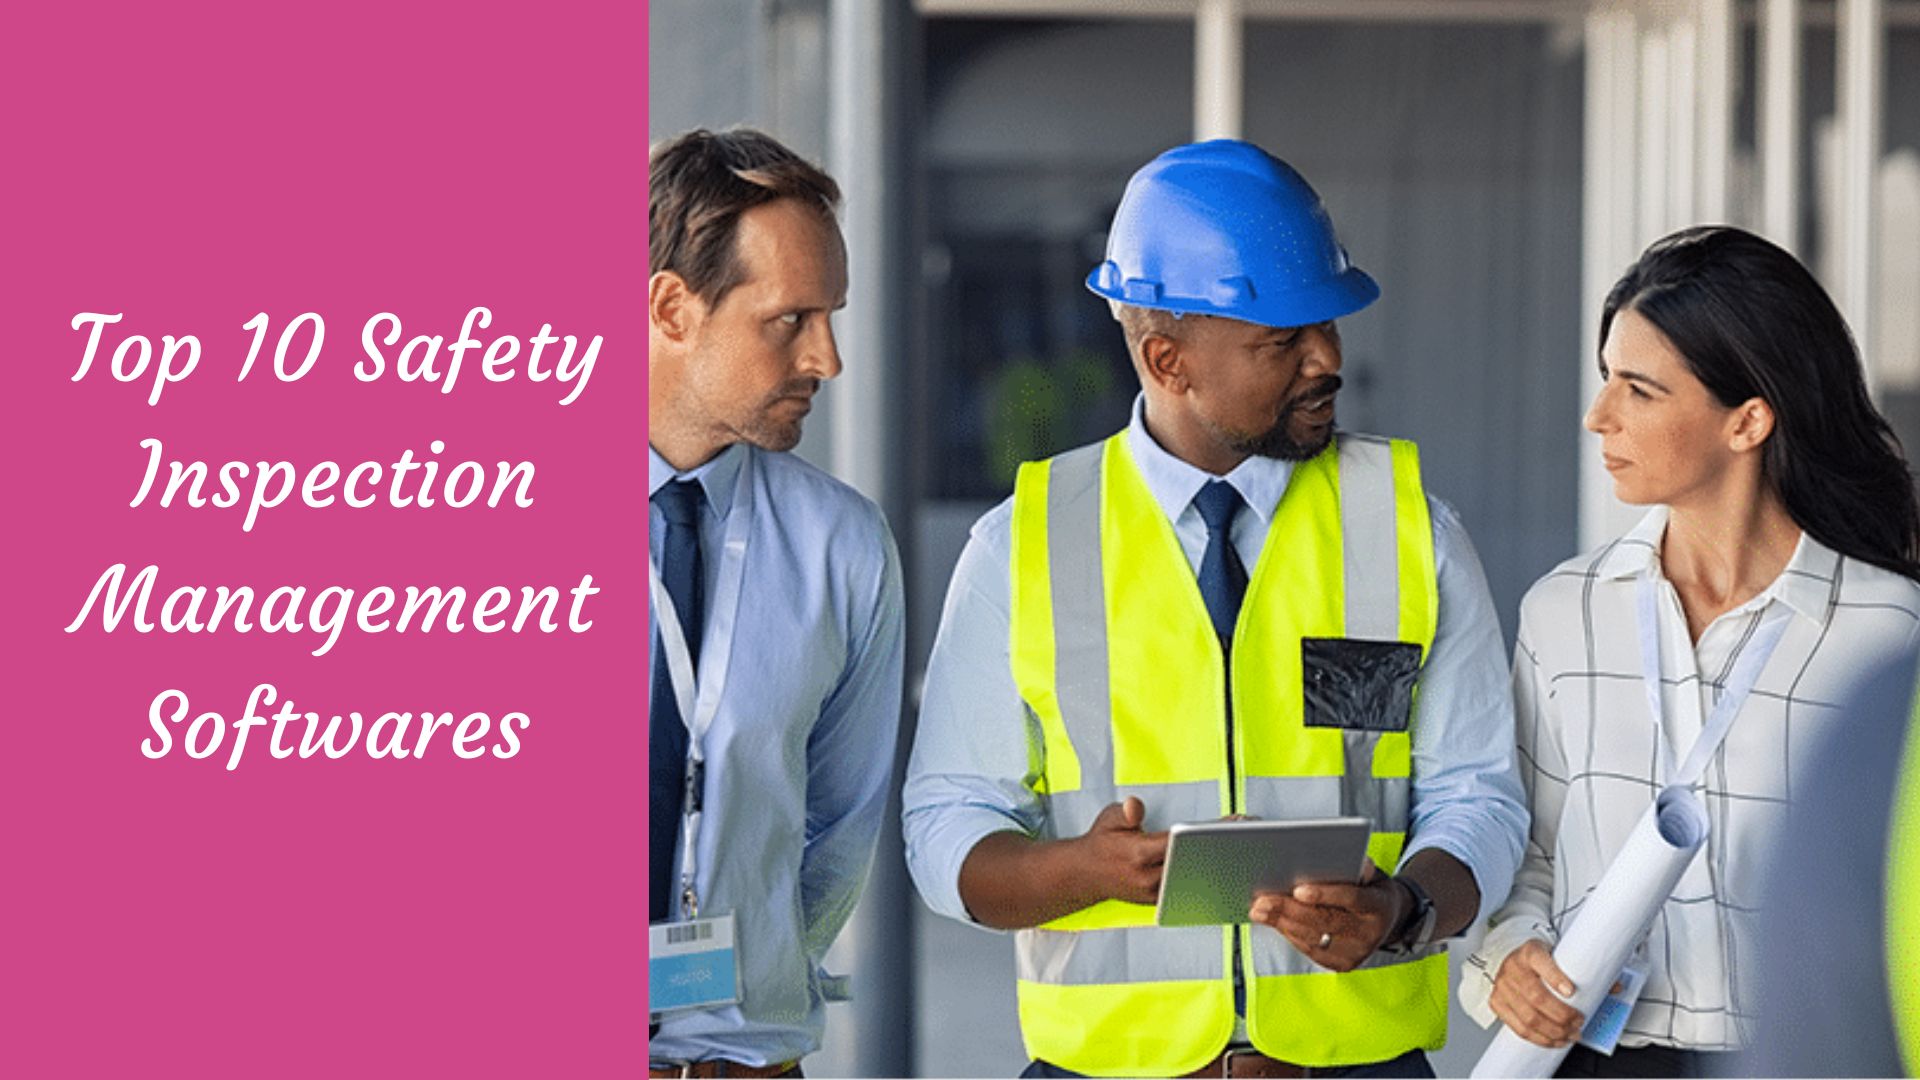 Top 10 Safety Inspection Management Software